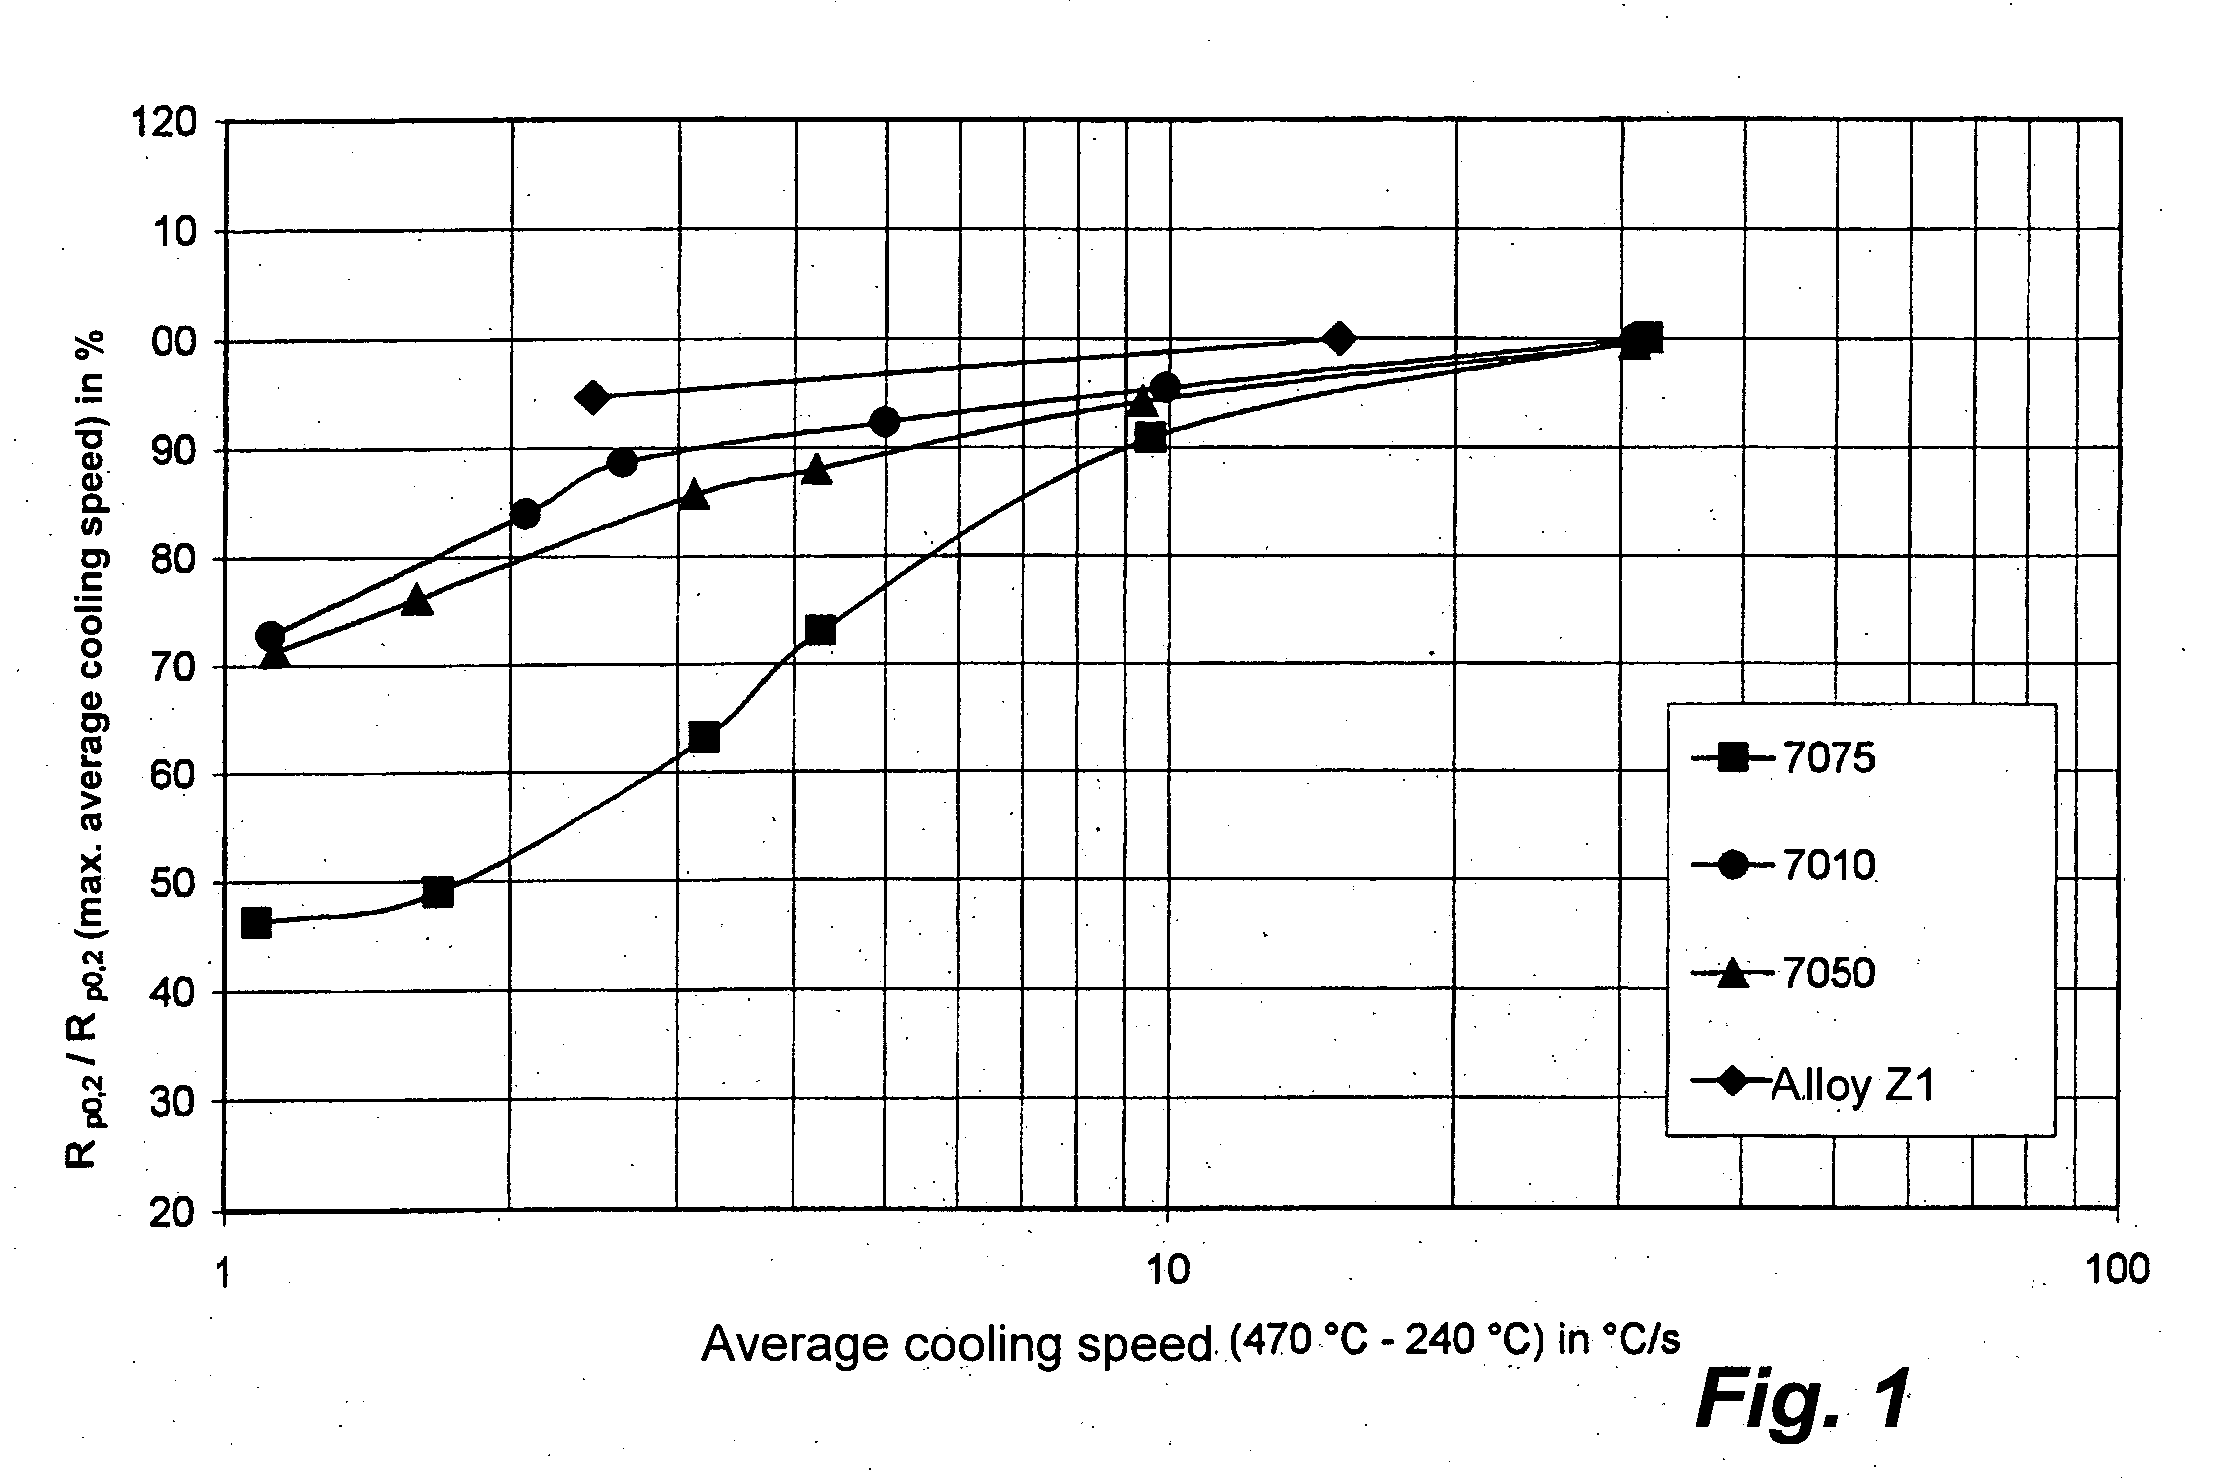 Aluminum alloy that is not sensitive to quenching, as well as method for the production of a semi-finished product therefrom